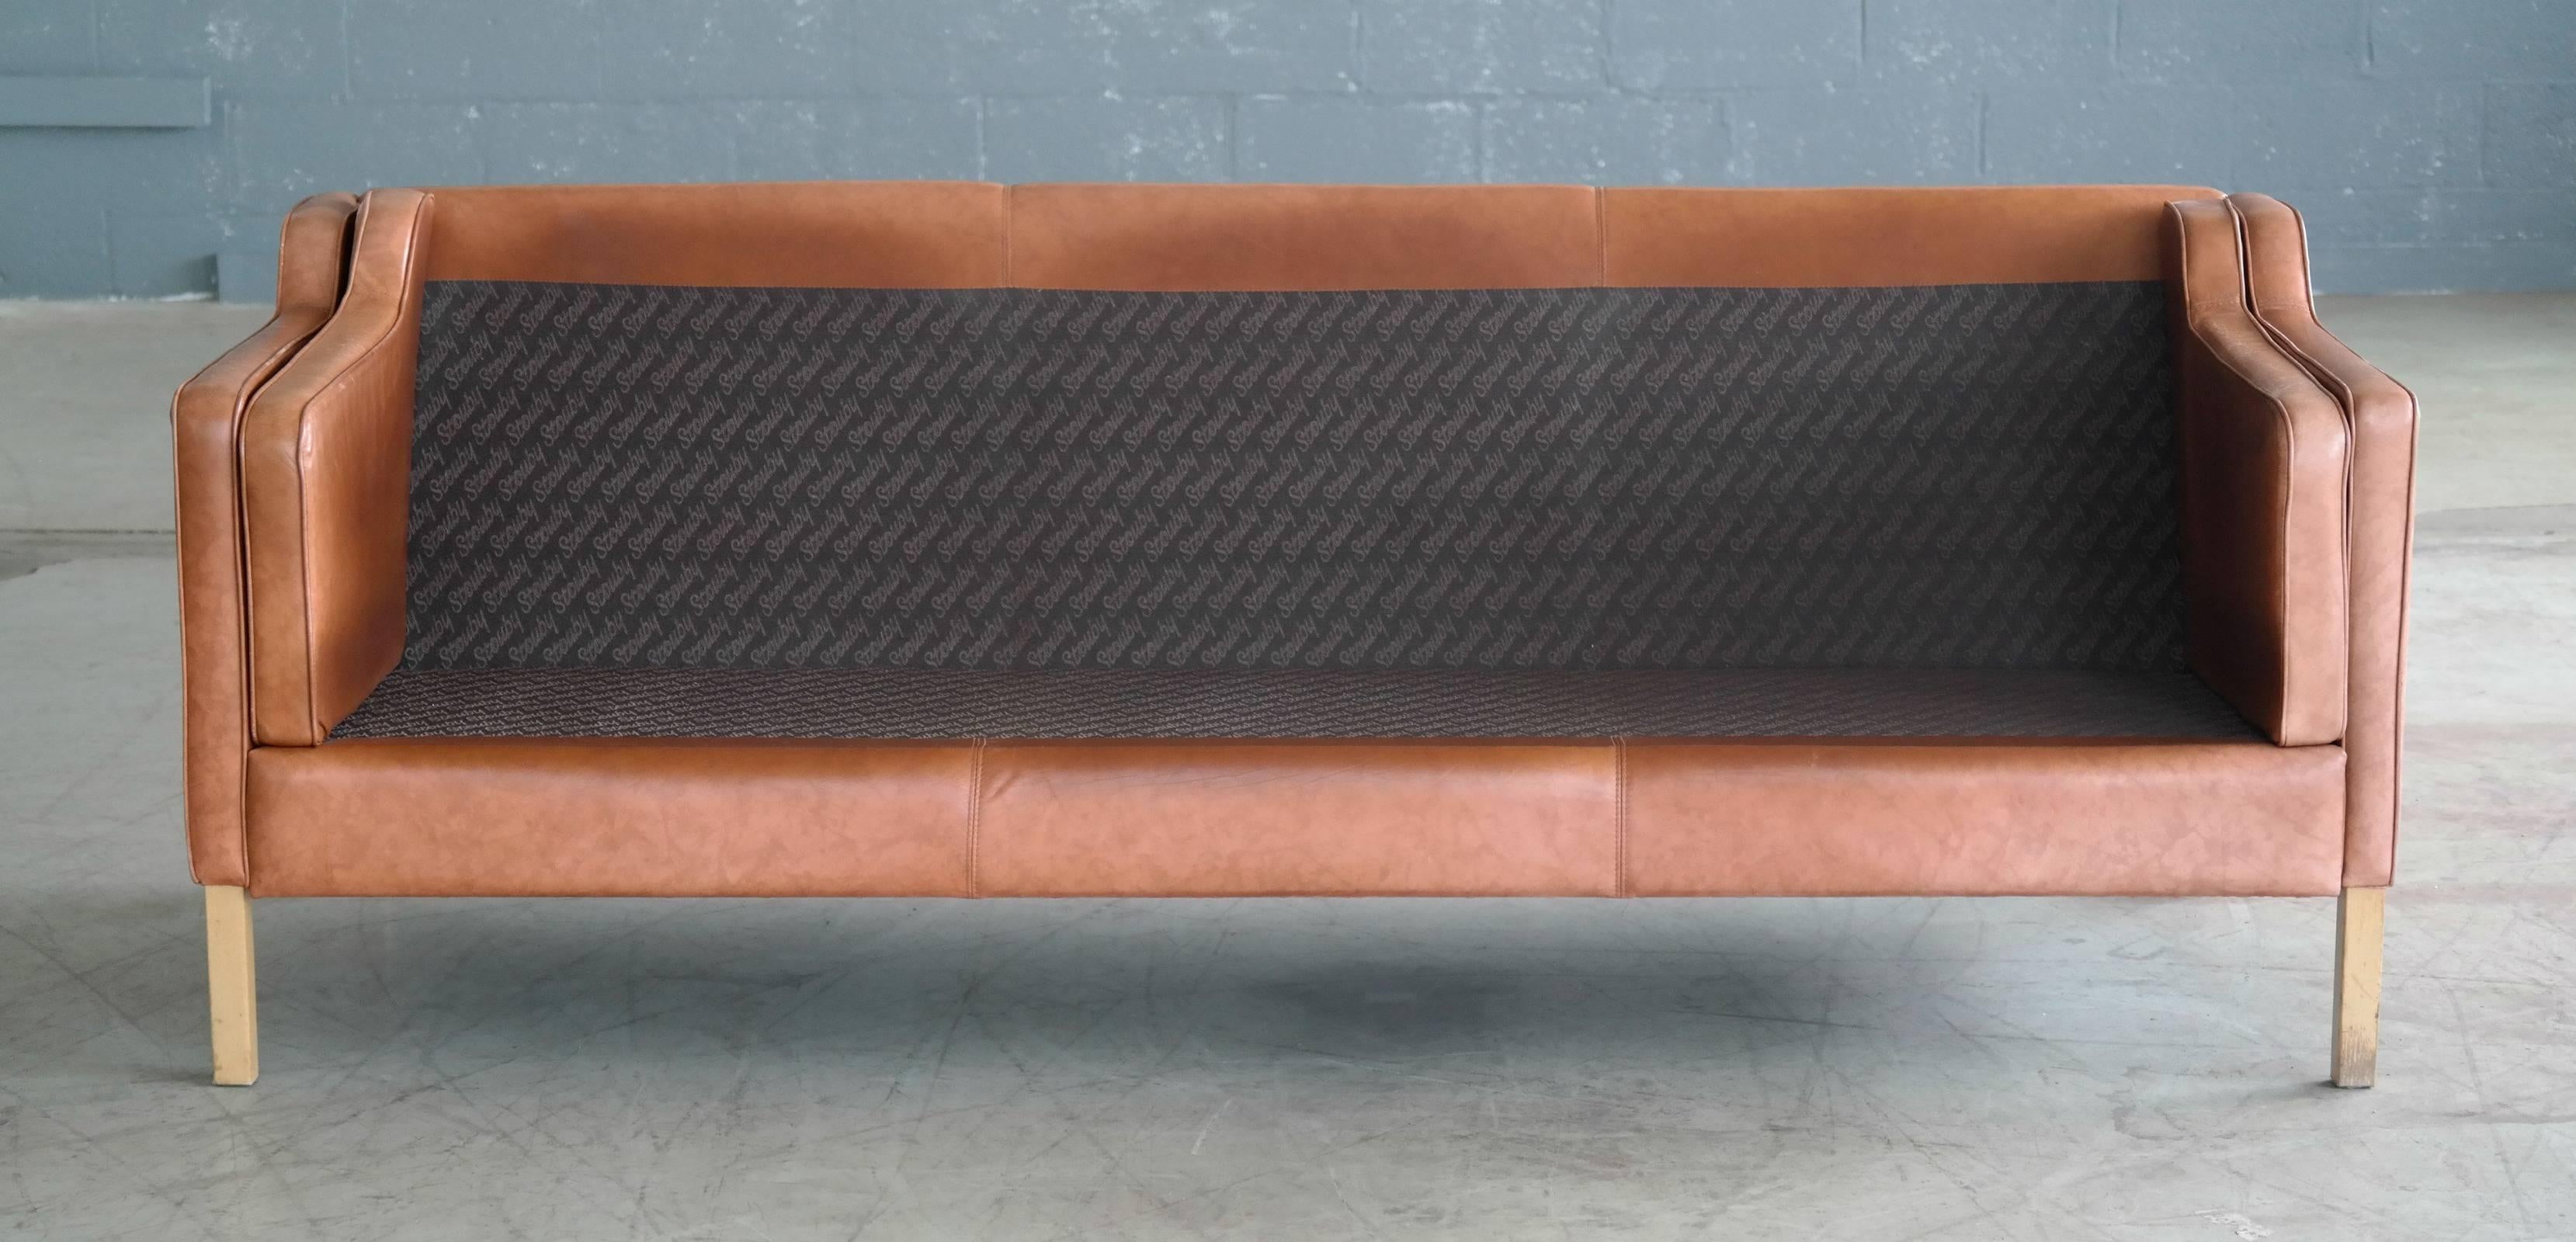 Børge Mogensen Style Sofa Model 2213 in Light Cognac Leather by Stouby Mobler 2